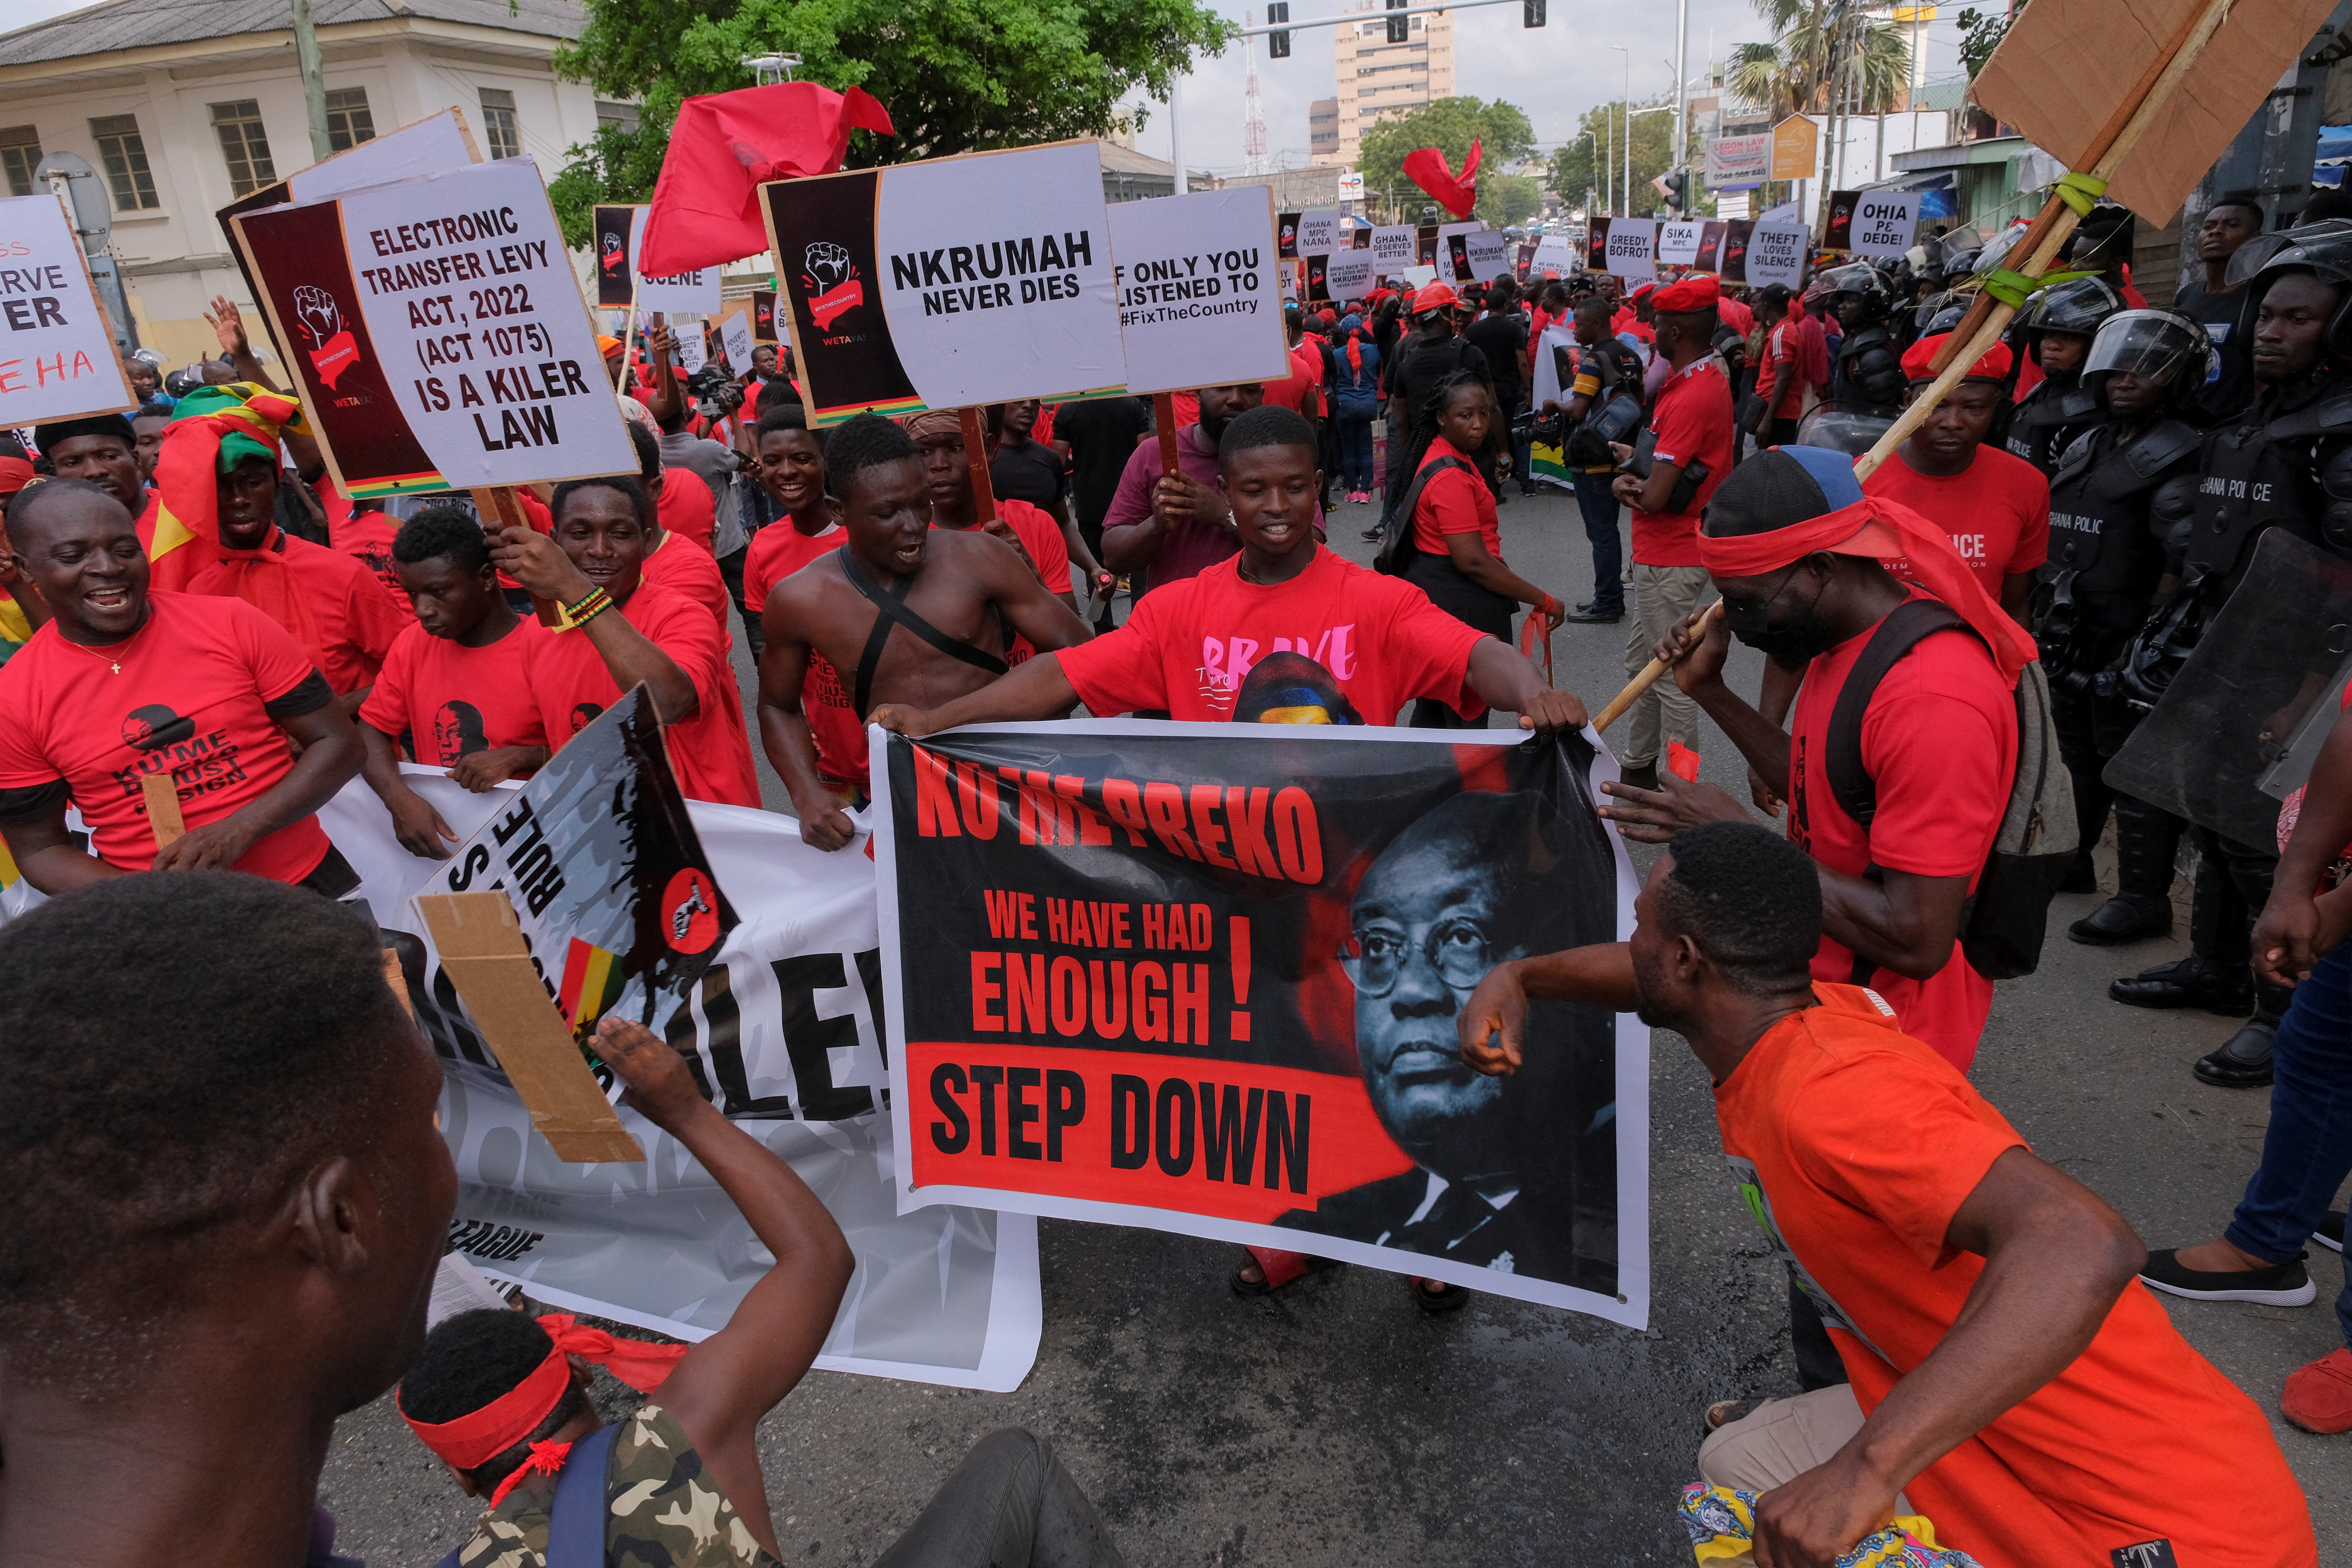 Ghanaian protesters demand president step down over economic crisis